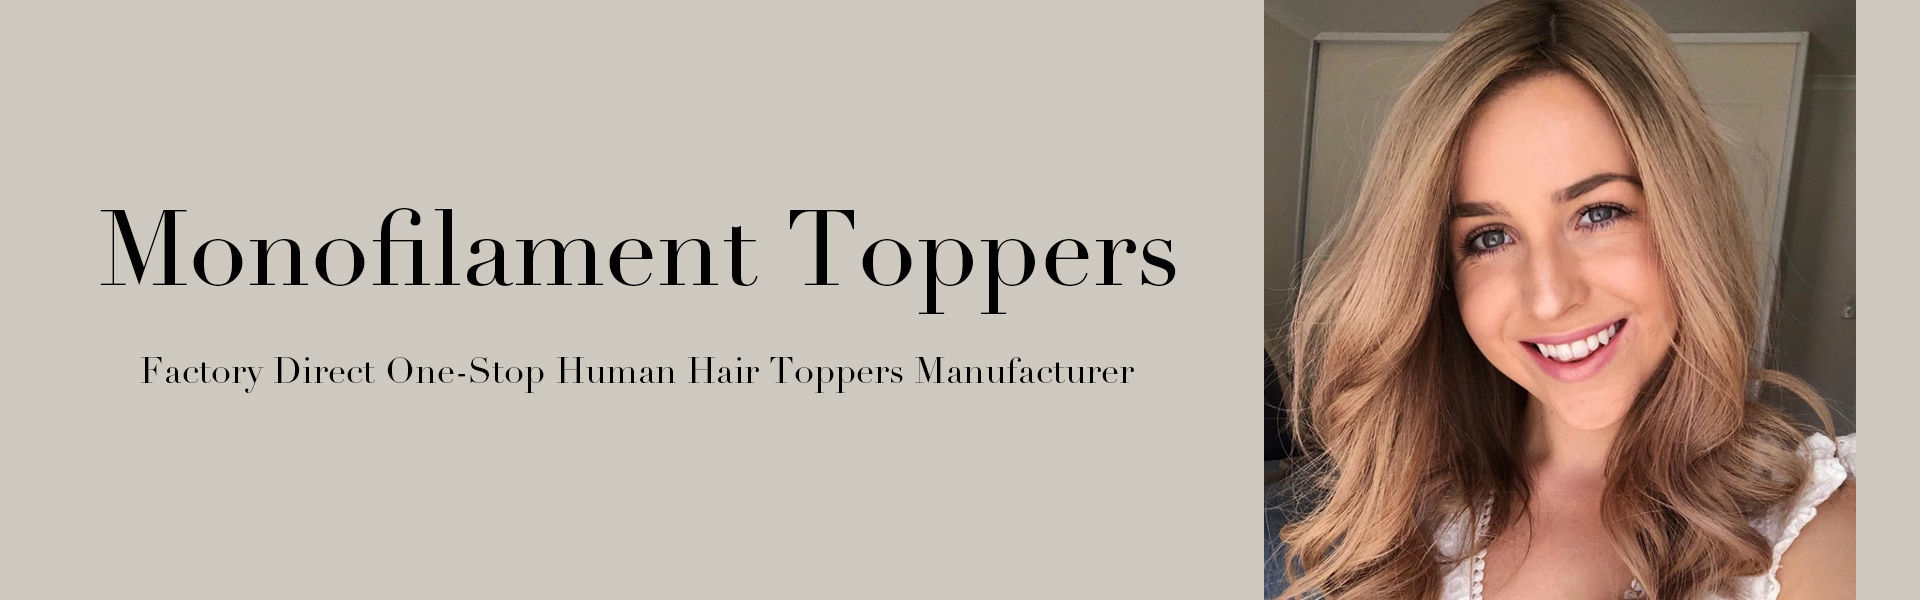 Monofilament Toppers